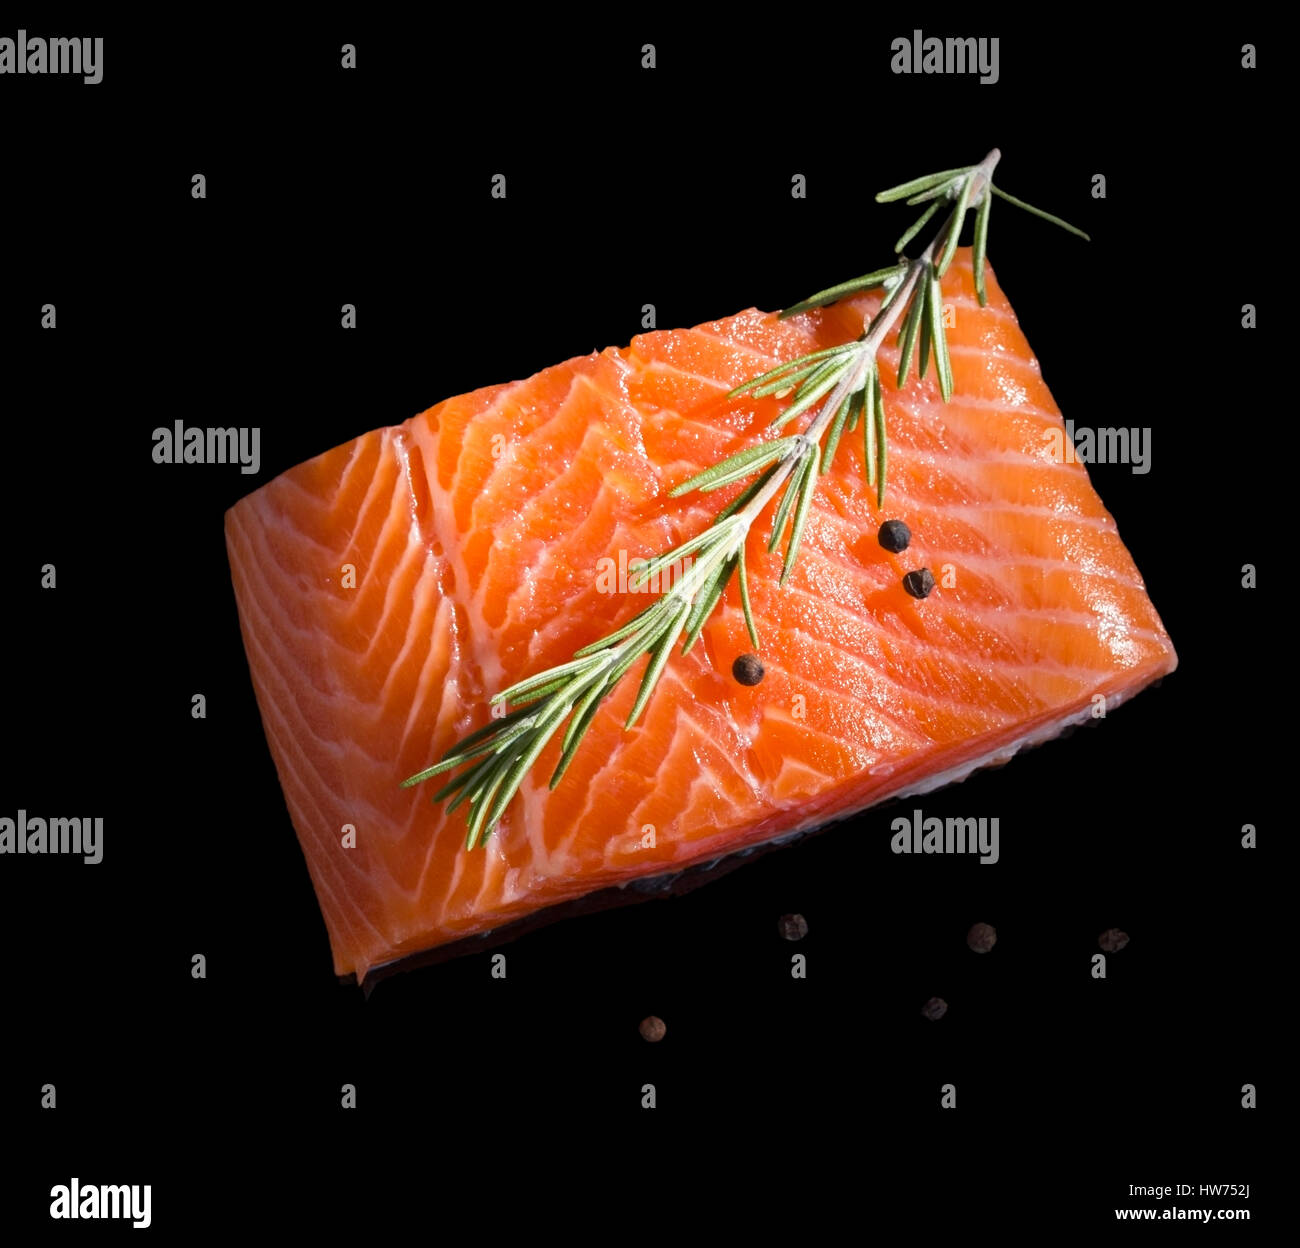 Raw salmon steak isolated on black background with reflection. Stock Photo